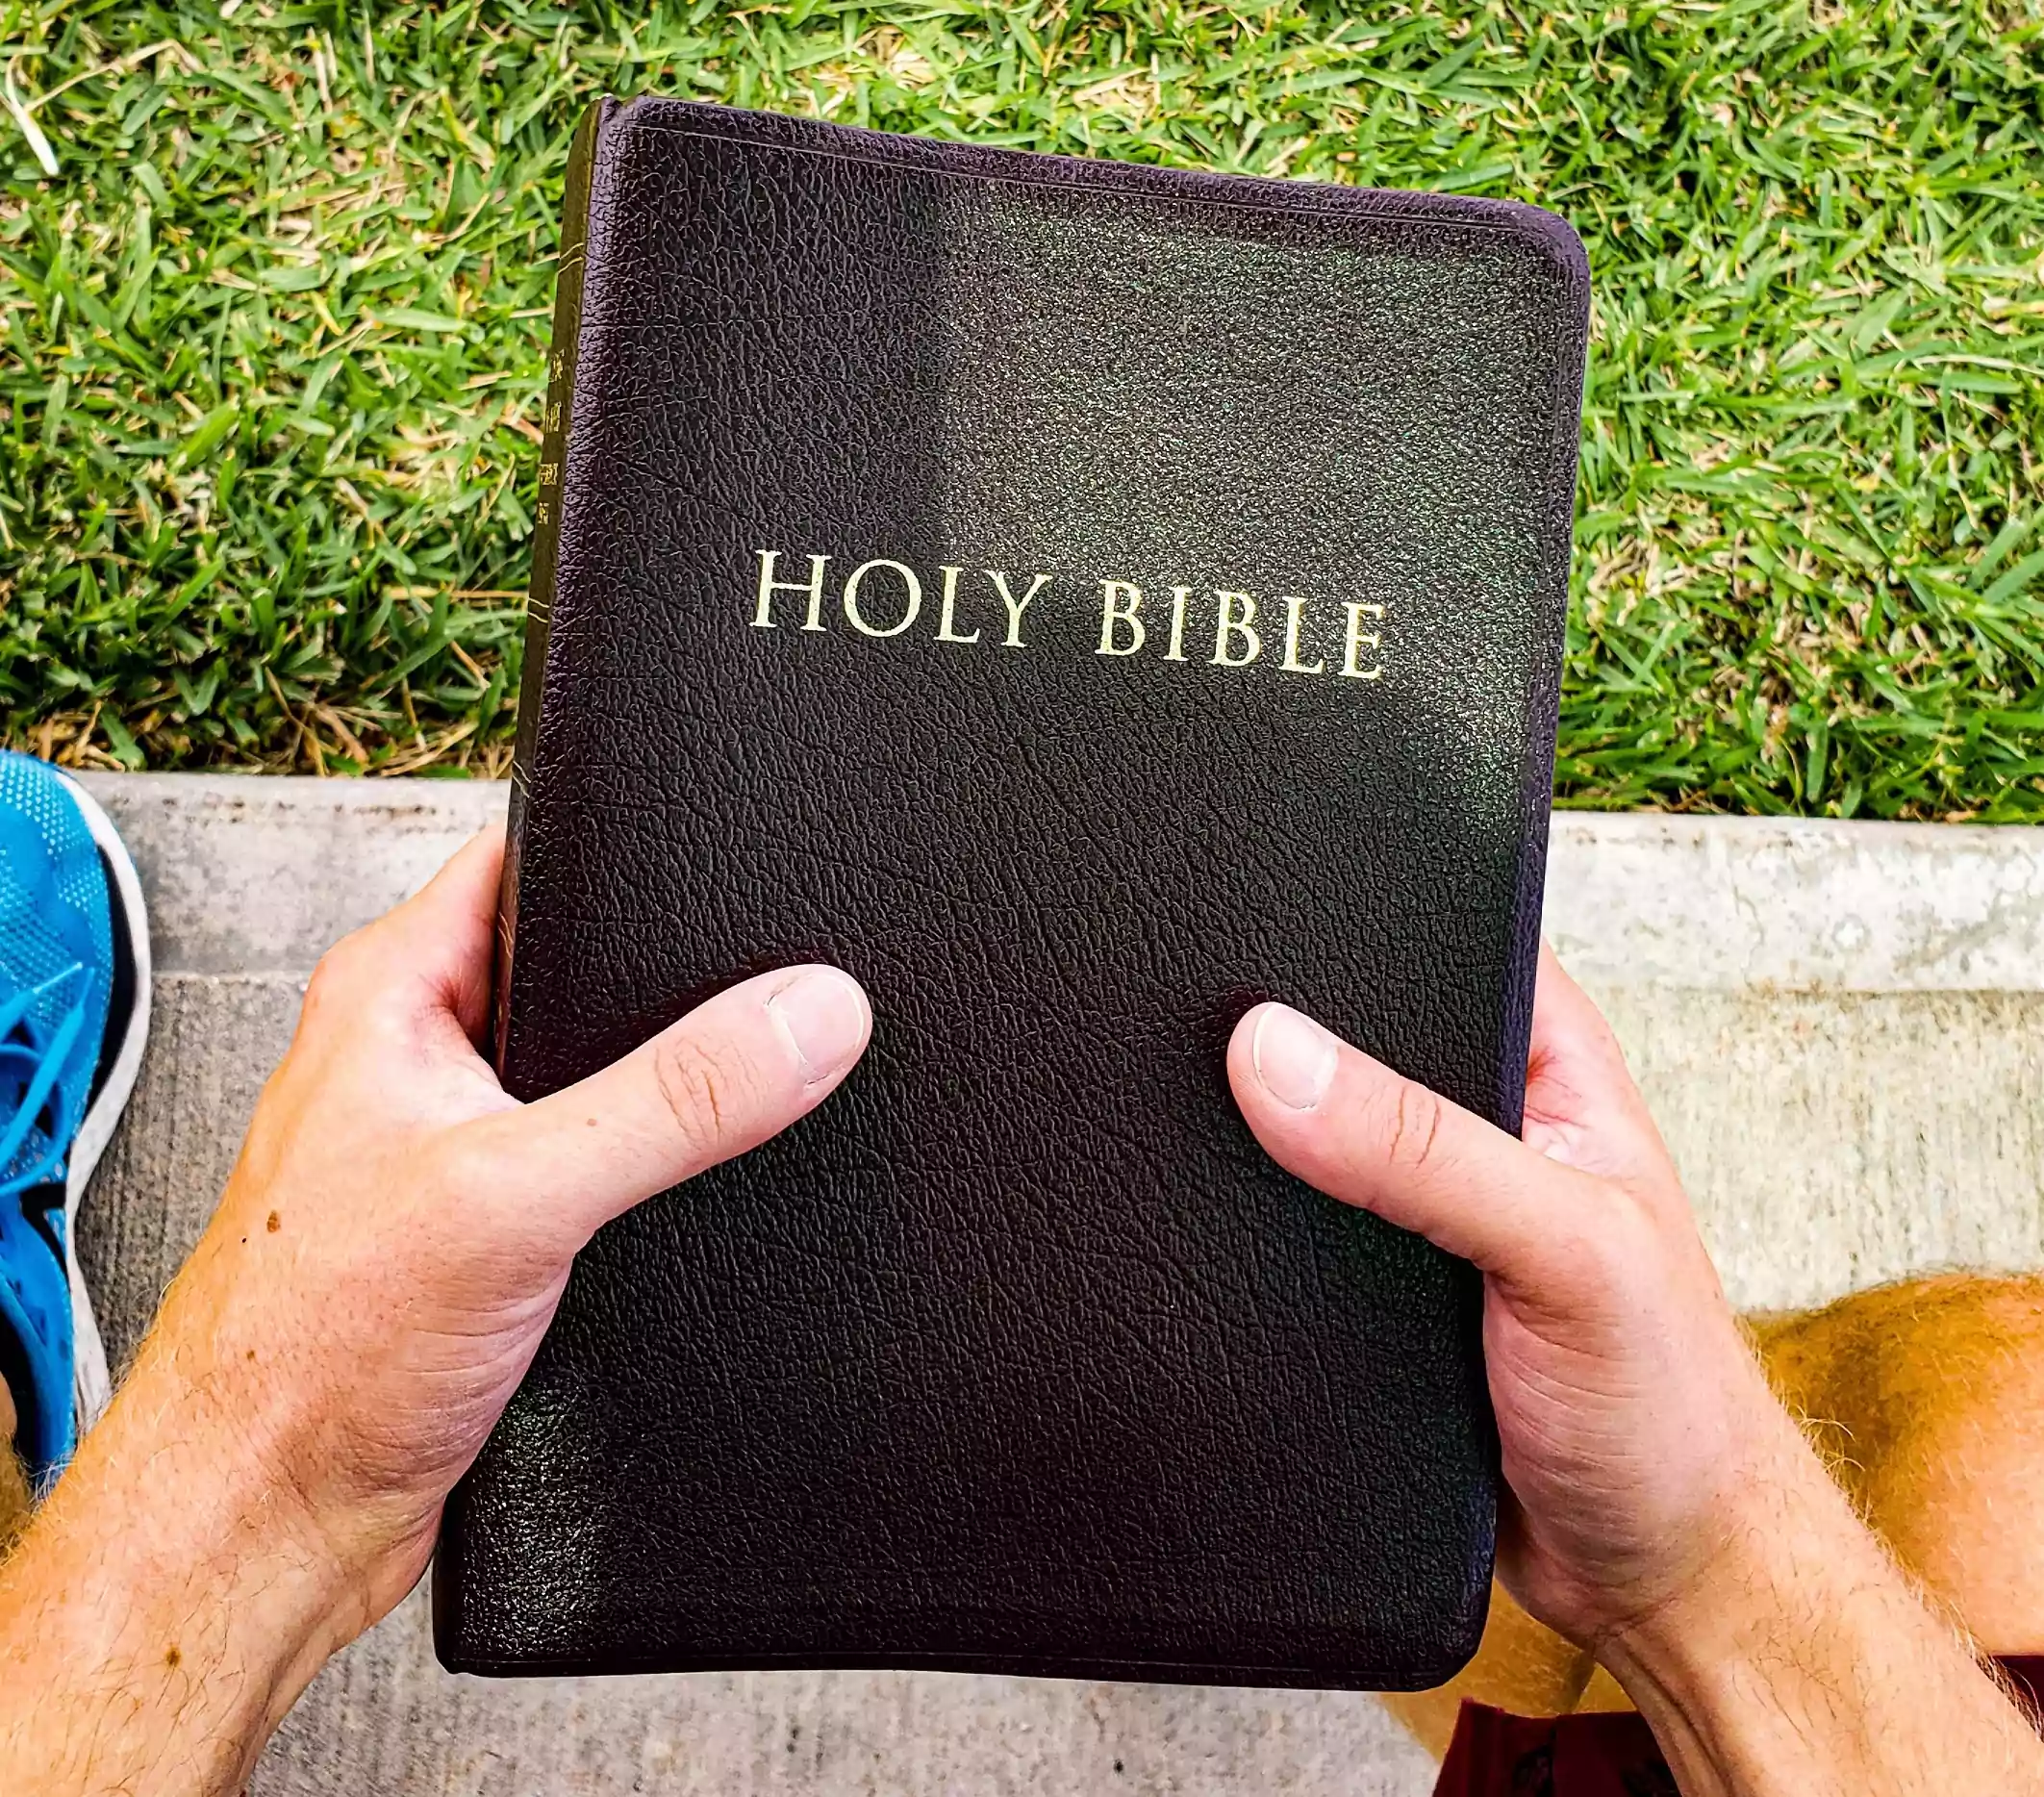 A Bible in the center of the Picture being held with two hands by a sitting person.